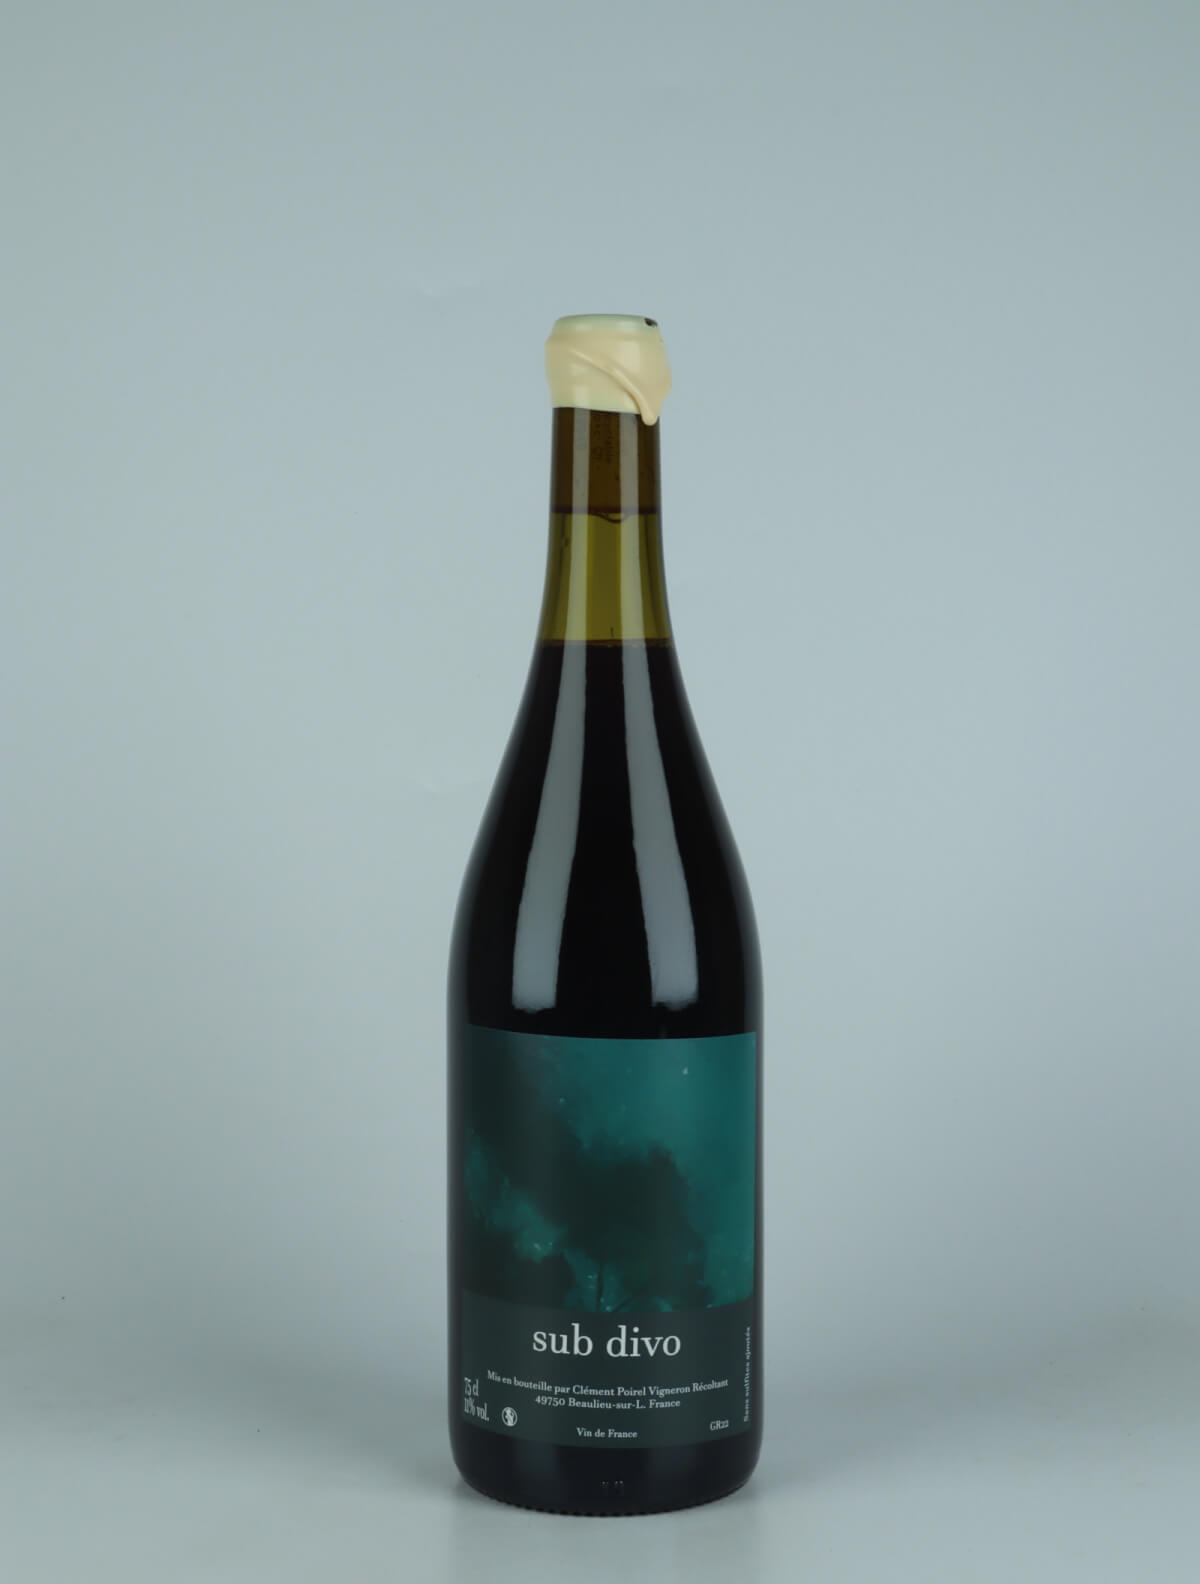 A bottle 2022 Sub Divo Red wine from Clément Poirel, Loire in France